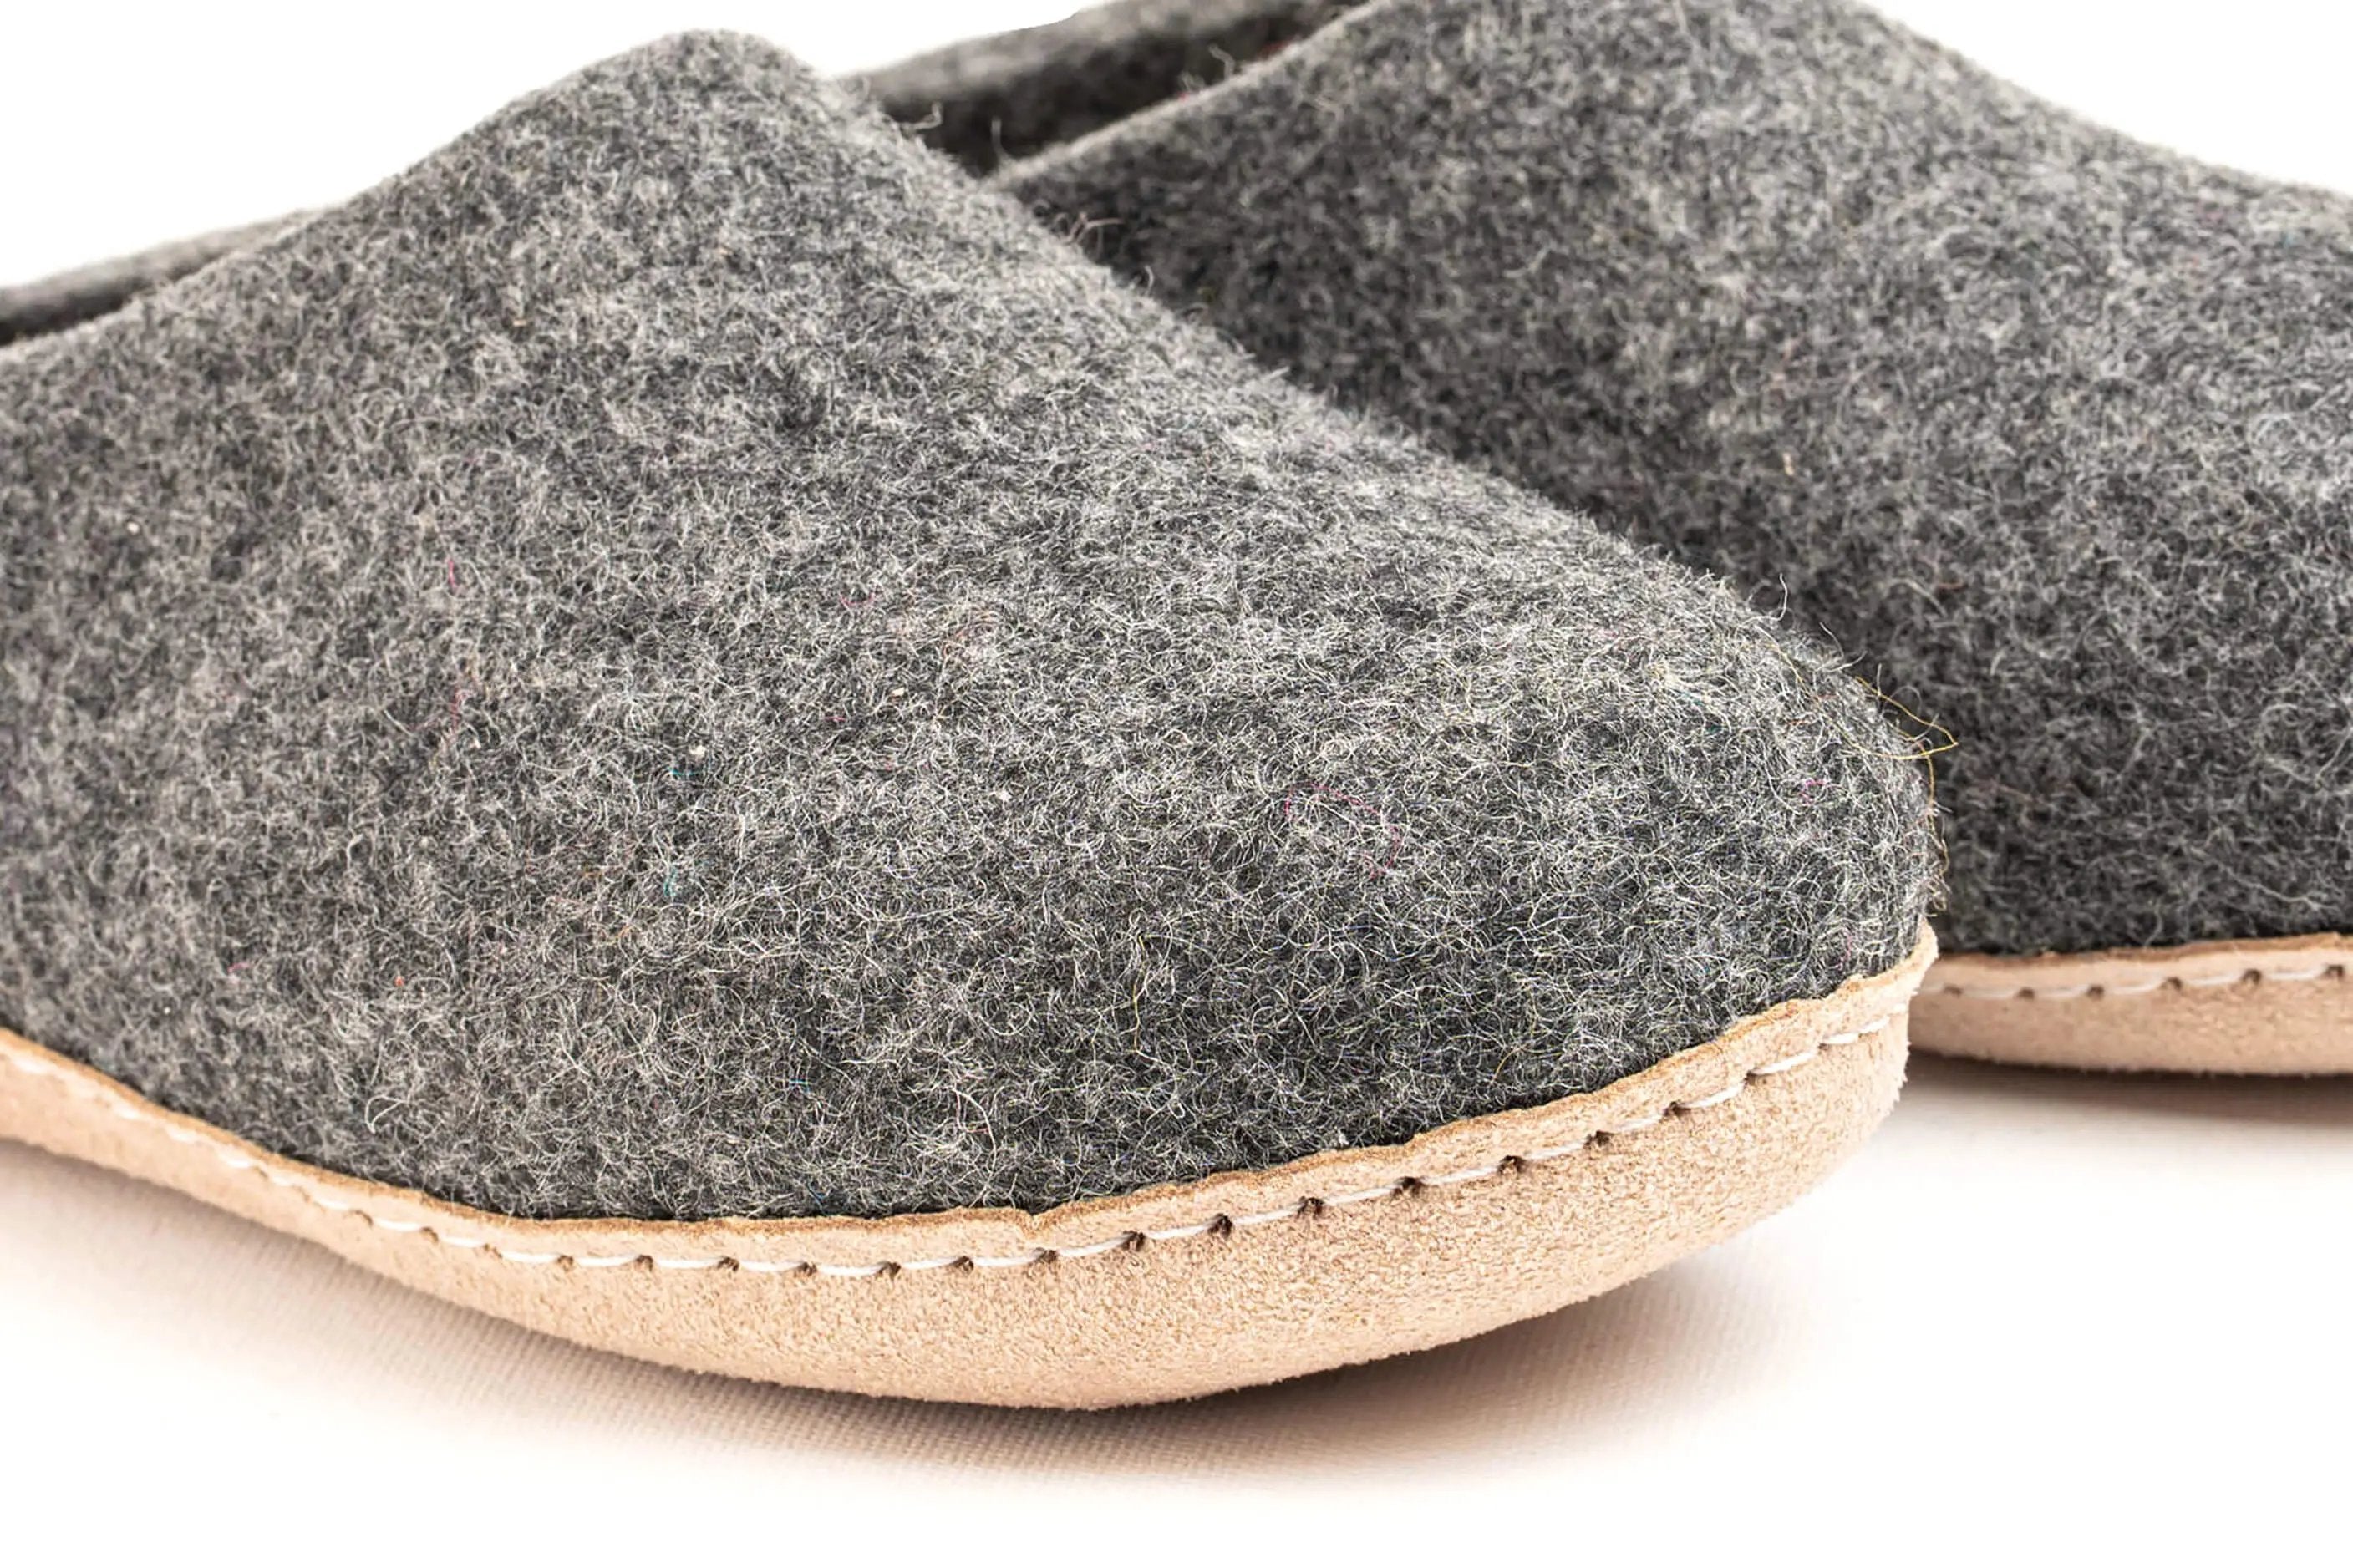 Indoor Open Heel Slippers With Leather Sole - Charcoal